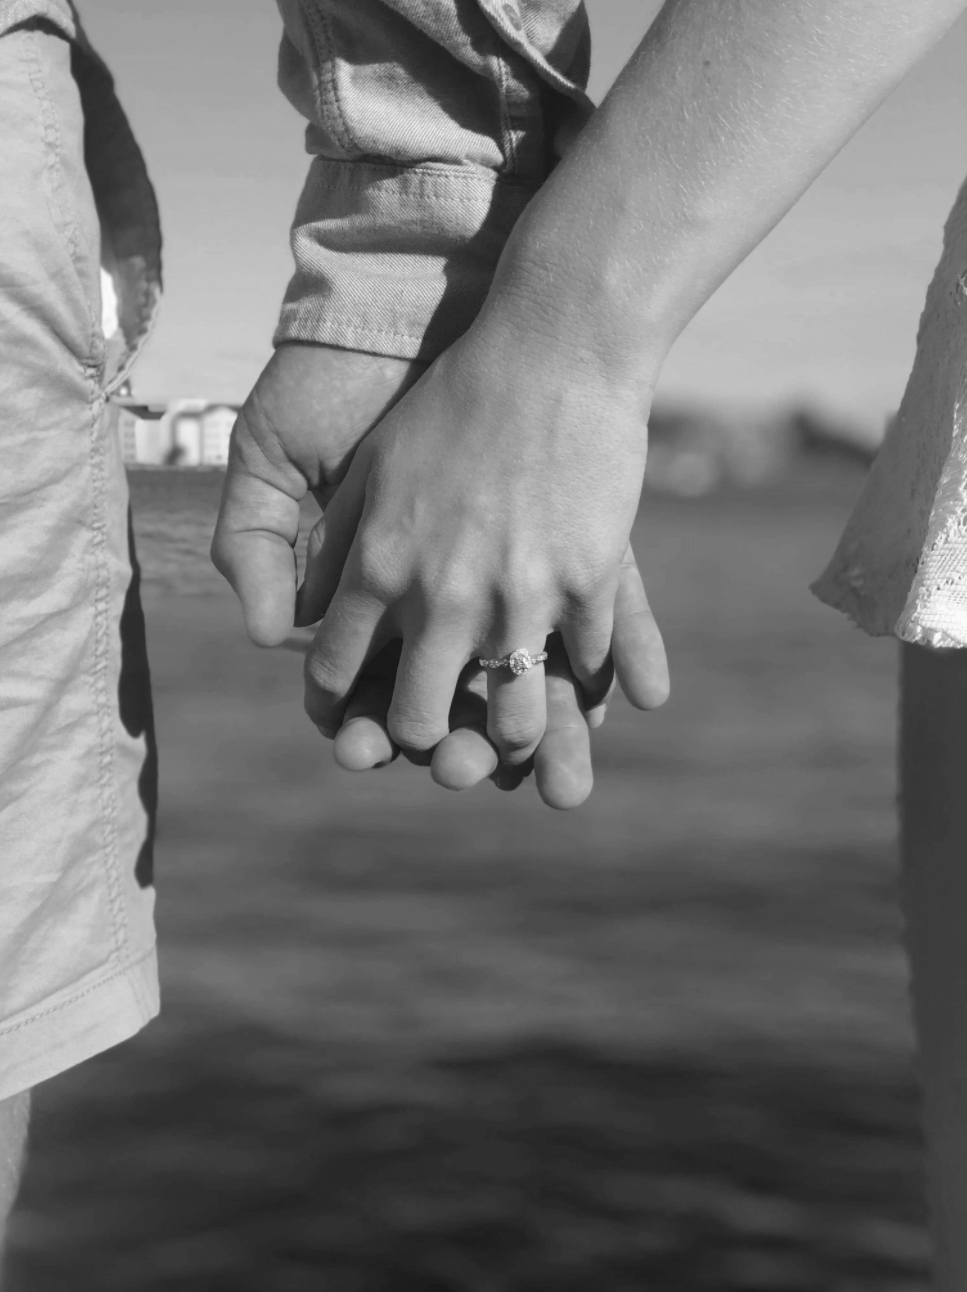 Two people recently engaged holding hands. The woman has an engagement ring on her hand.